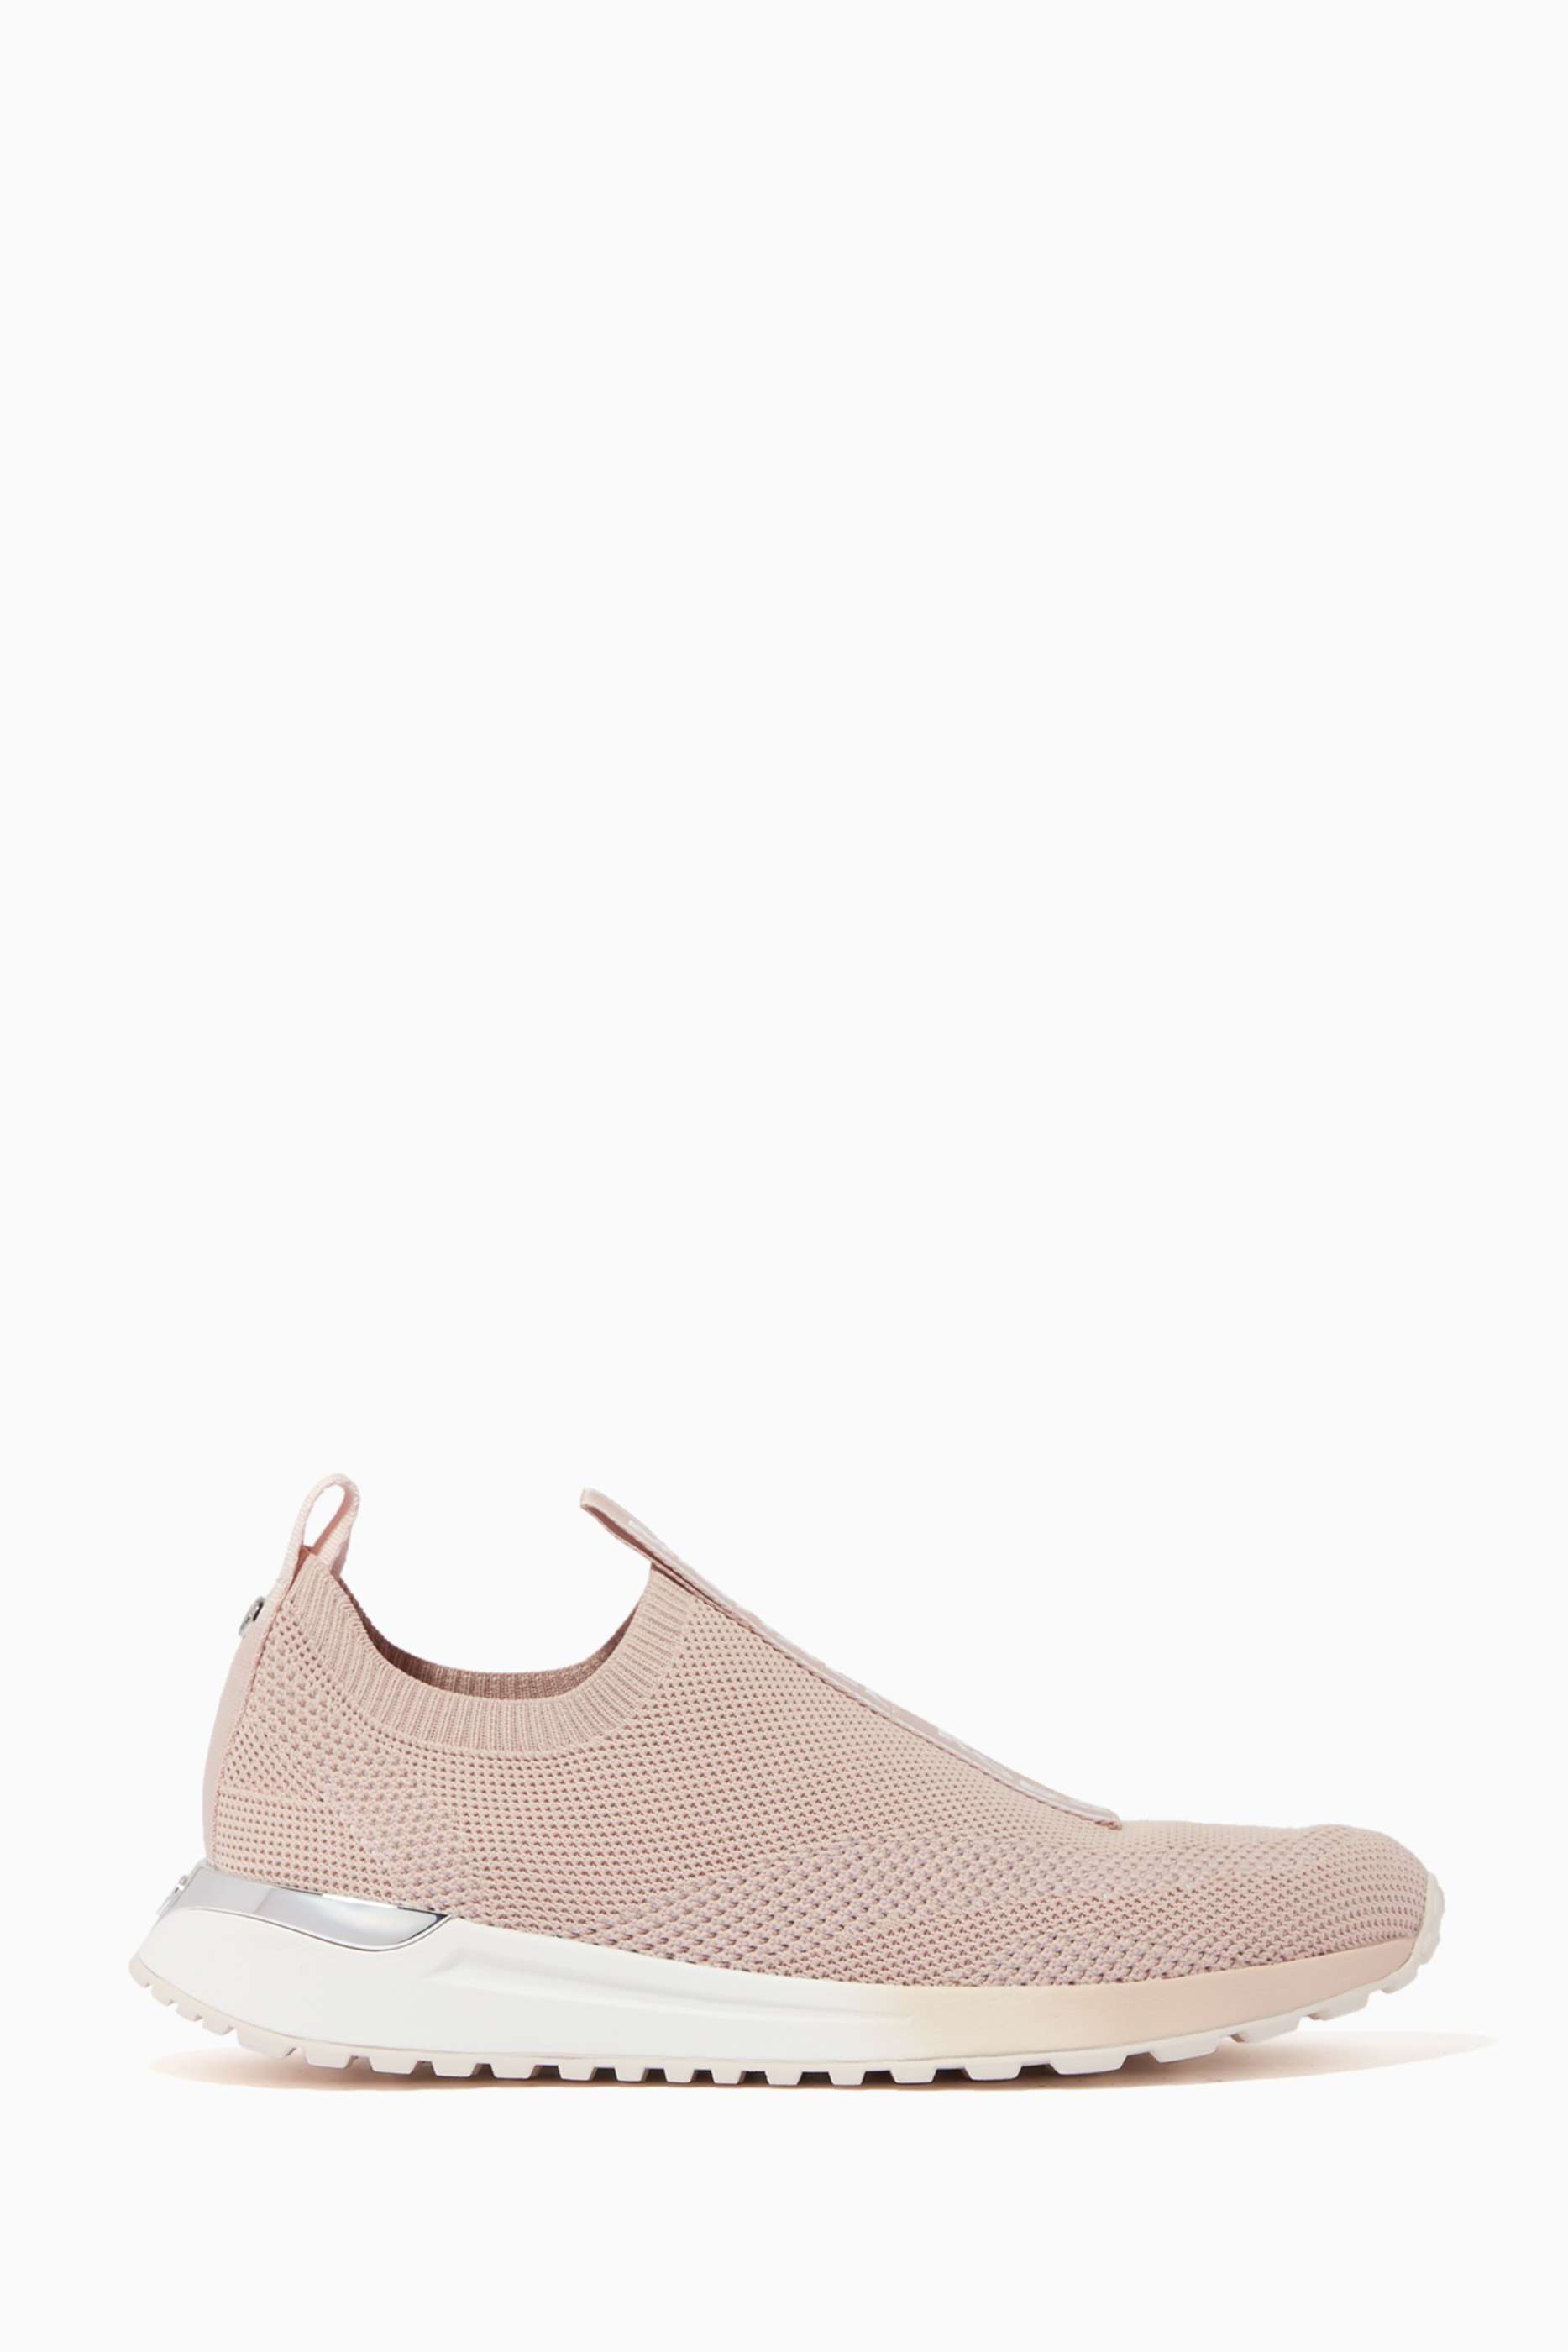 Shop Michael Kors Pink Bodie Logo Tape Sneakers in Mesh for 